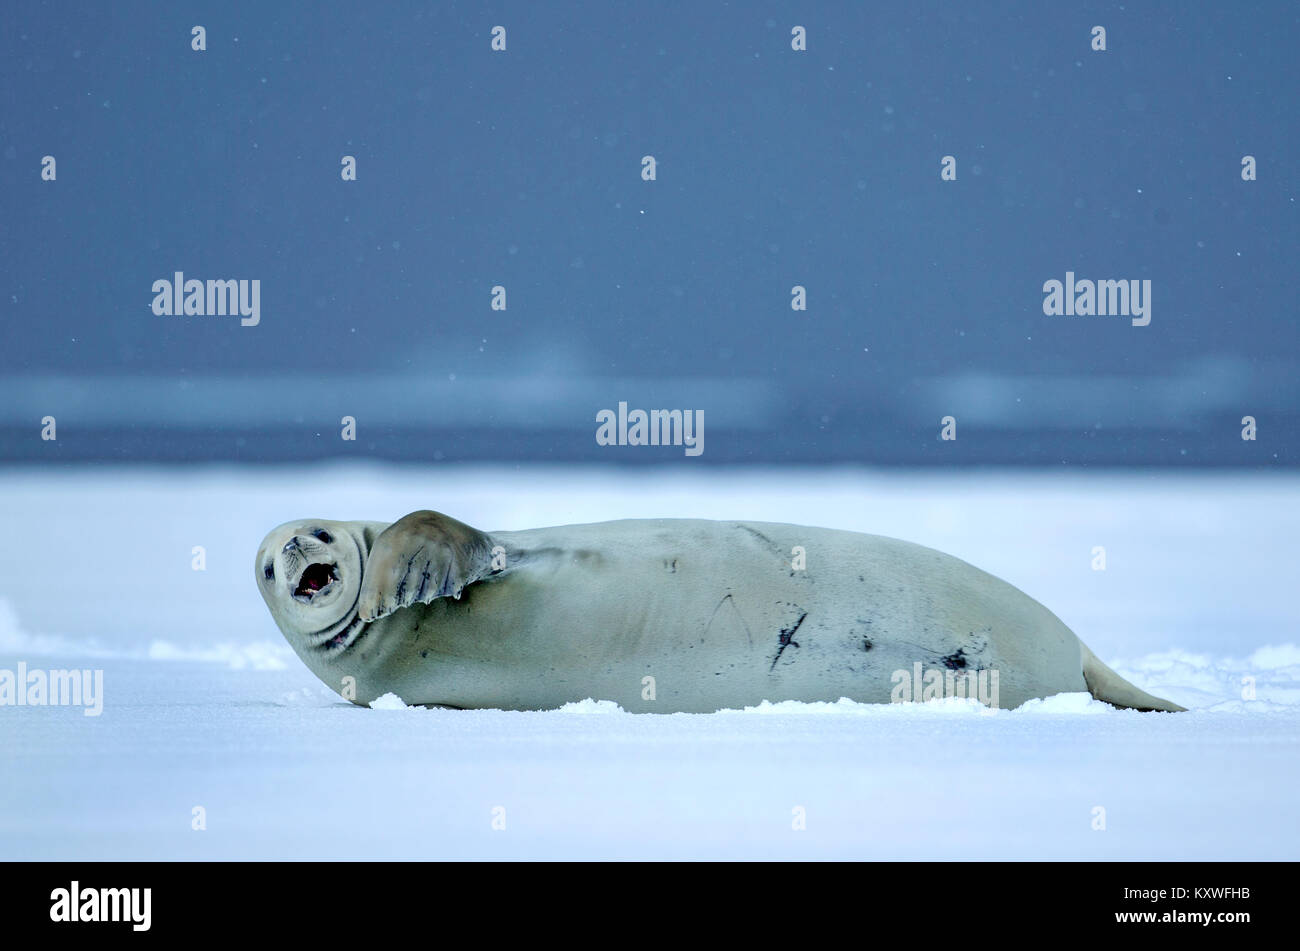 Crabeater Seal (Lobodon carcinophagus) in the Snow Stock Photo